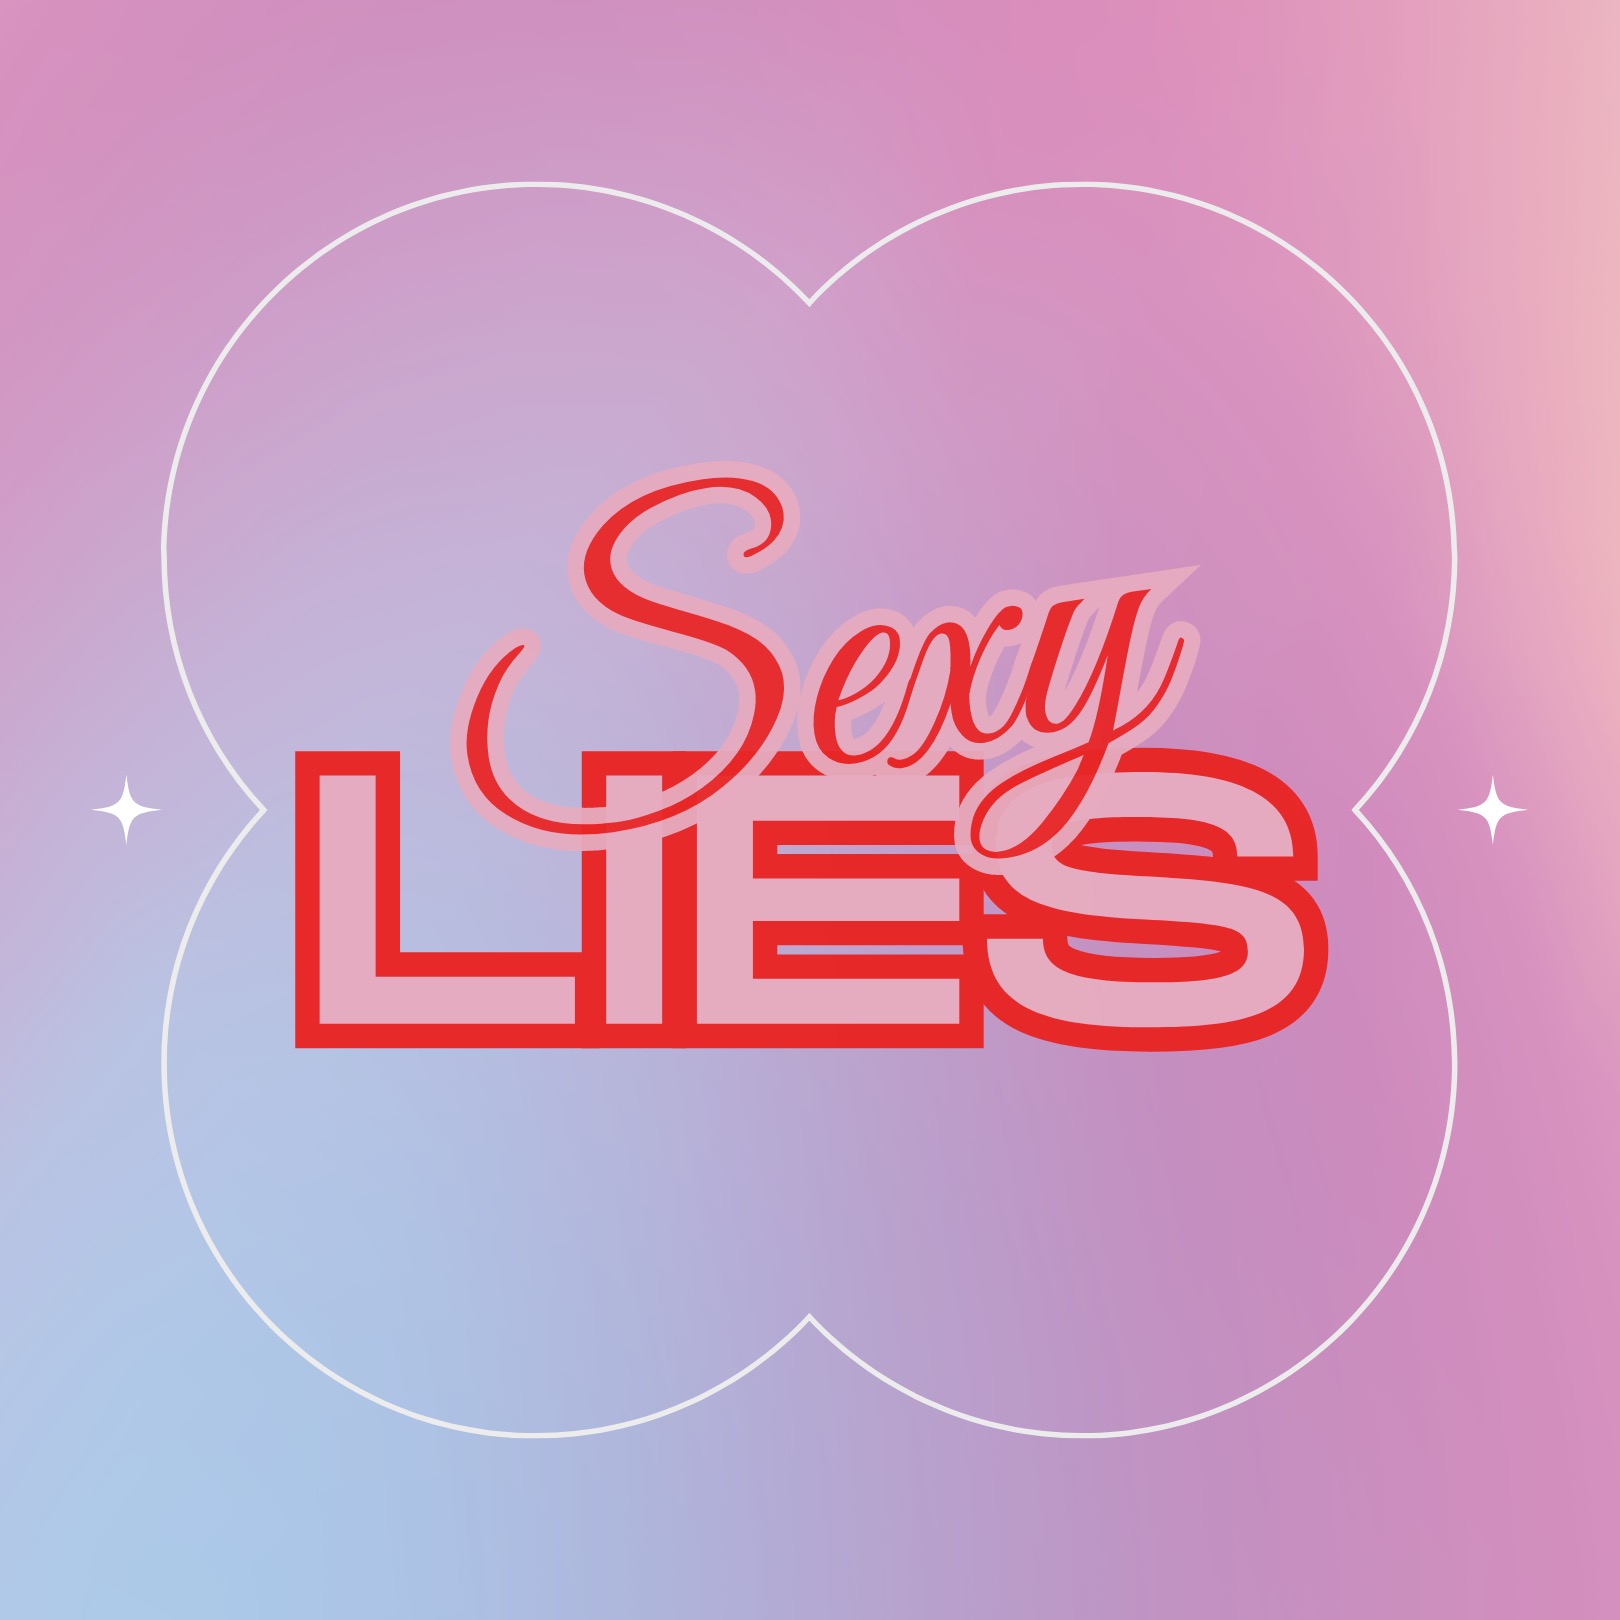 Sexy Lies - "My sexuality is the most important thing about me"